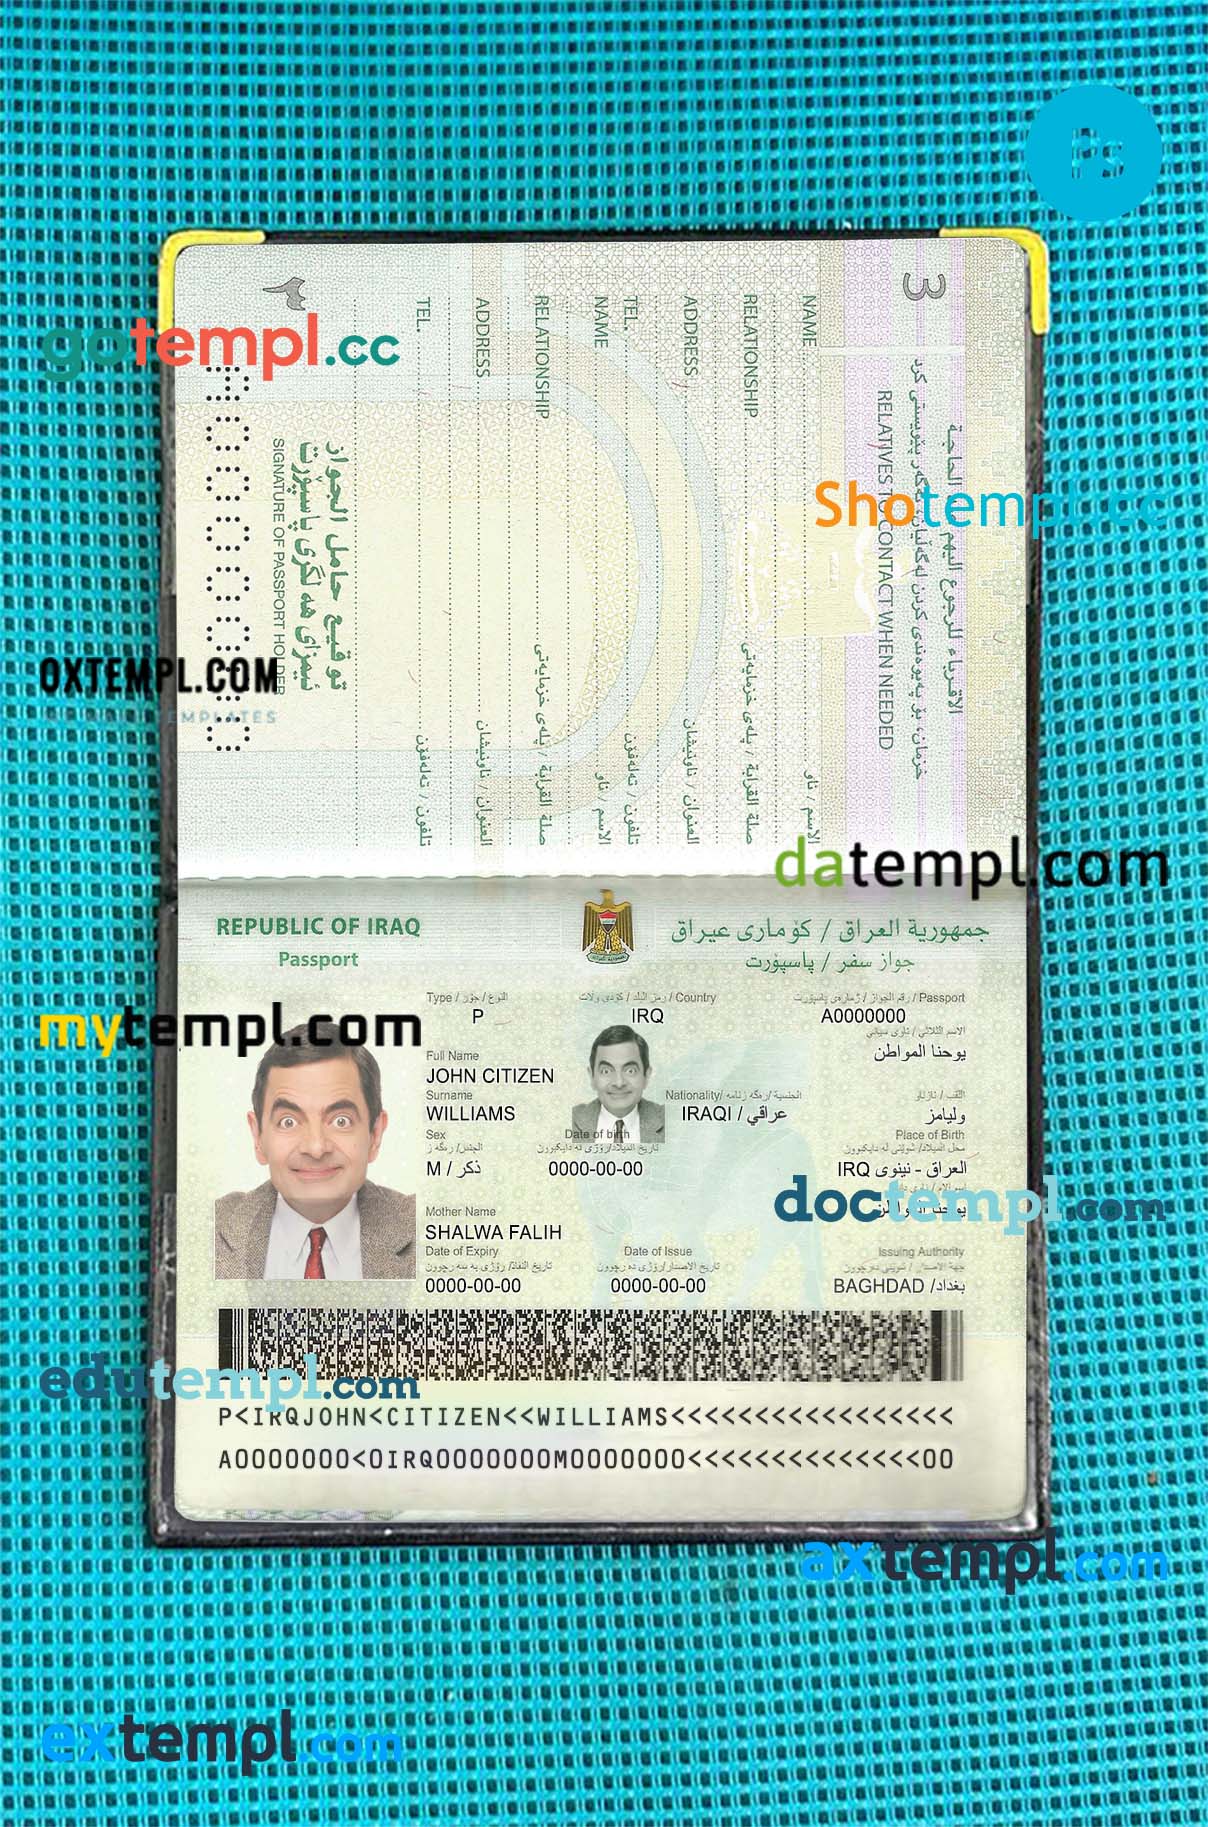 Ghana passport editable PSD files, scan and photo look templates, 2 in 1